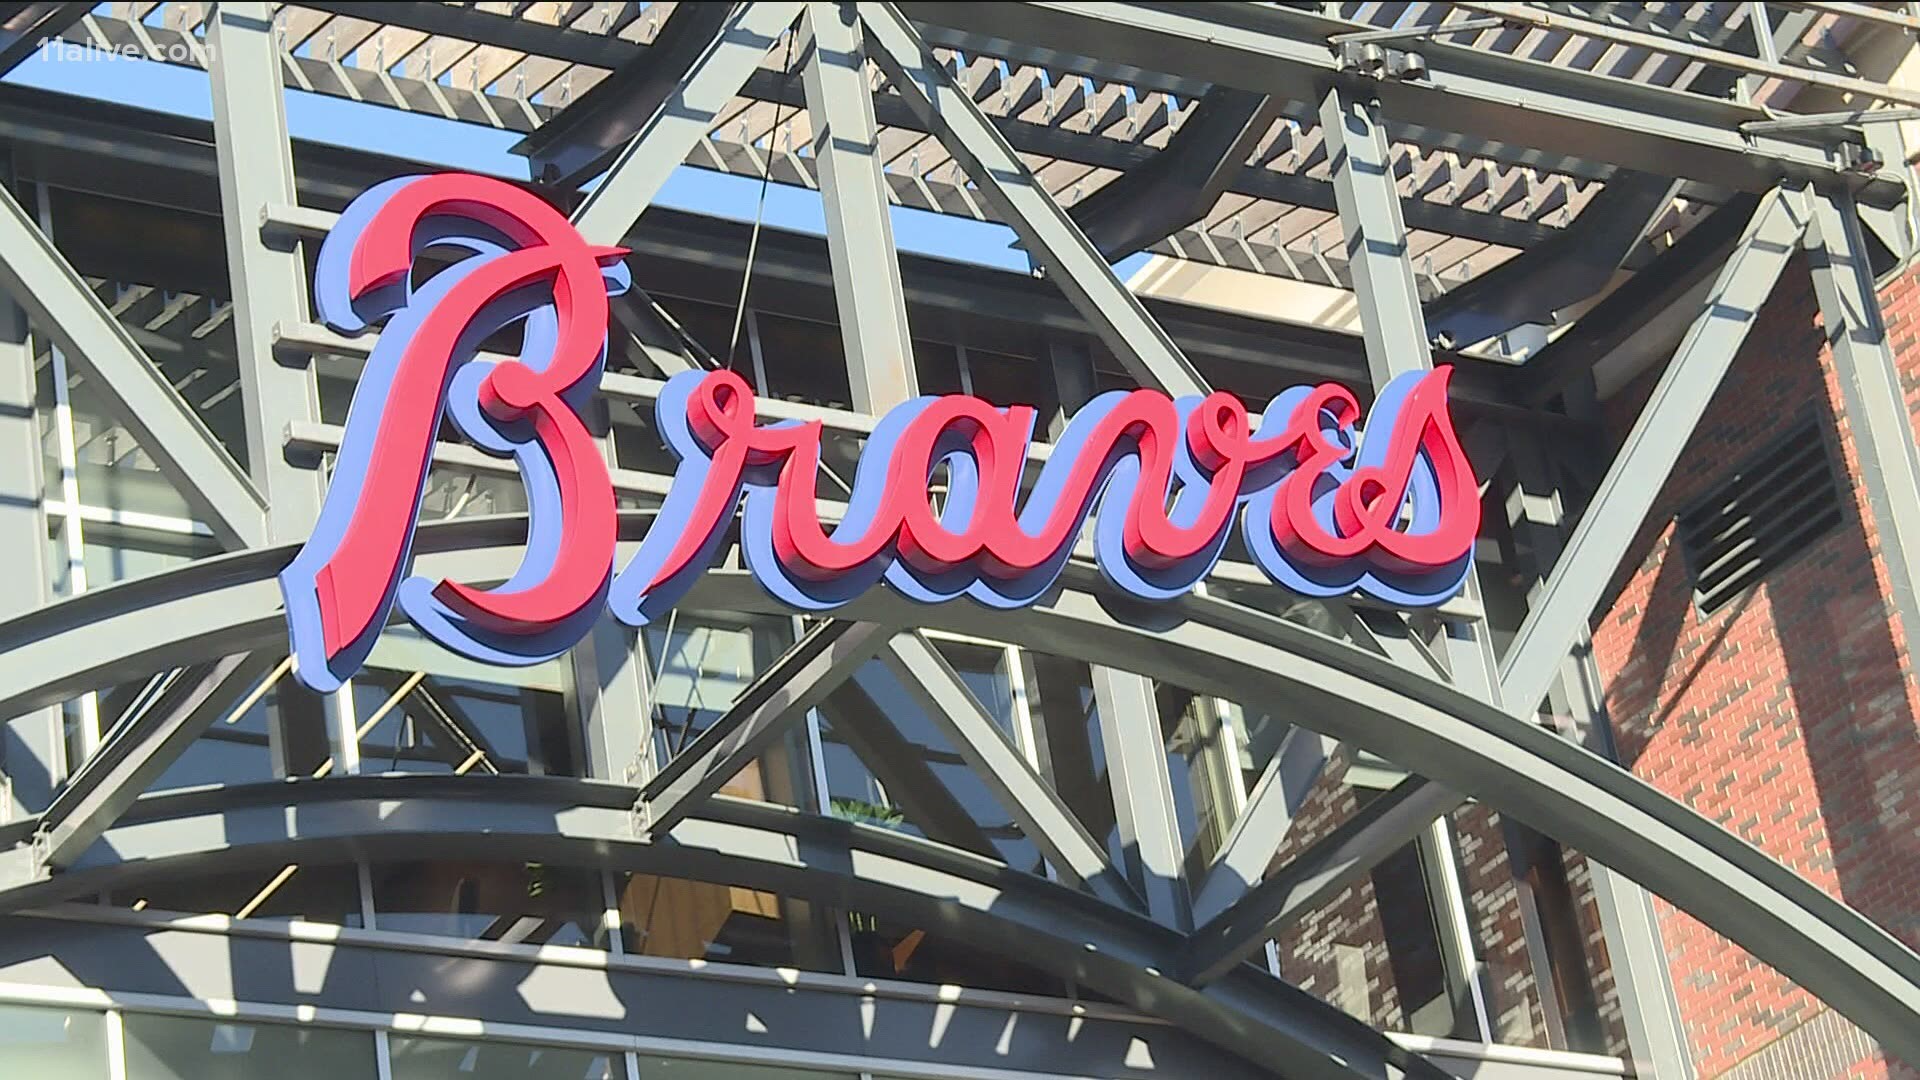 The Braves’ home opener is Friday against the Phillies, opening Truist Park at 33% capacity with 13,500 fans per game.